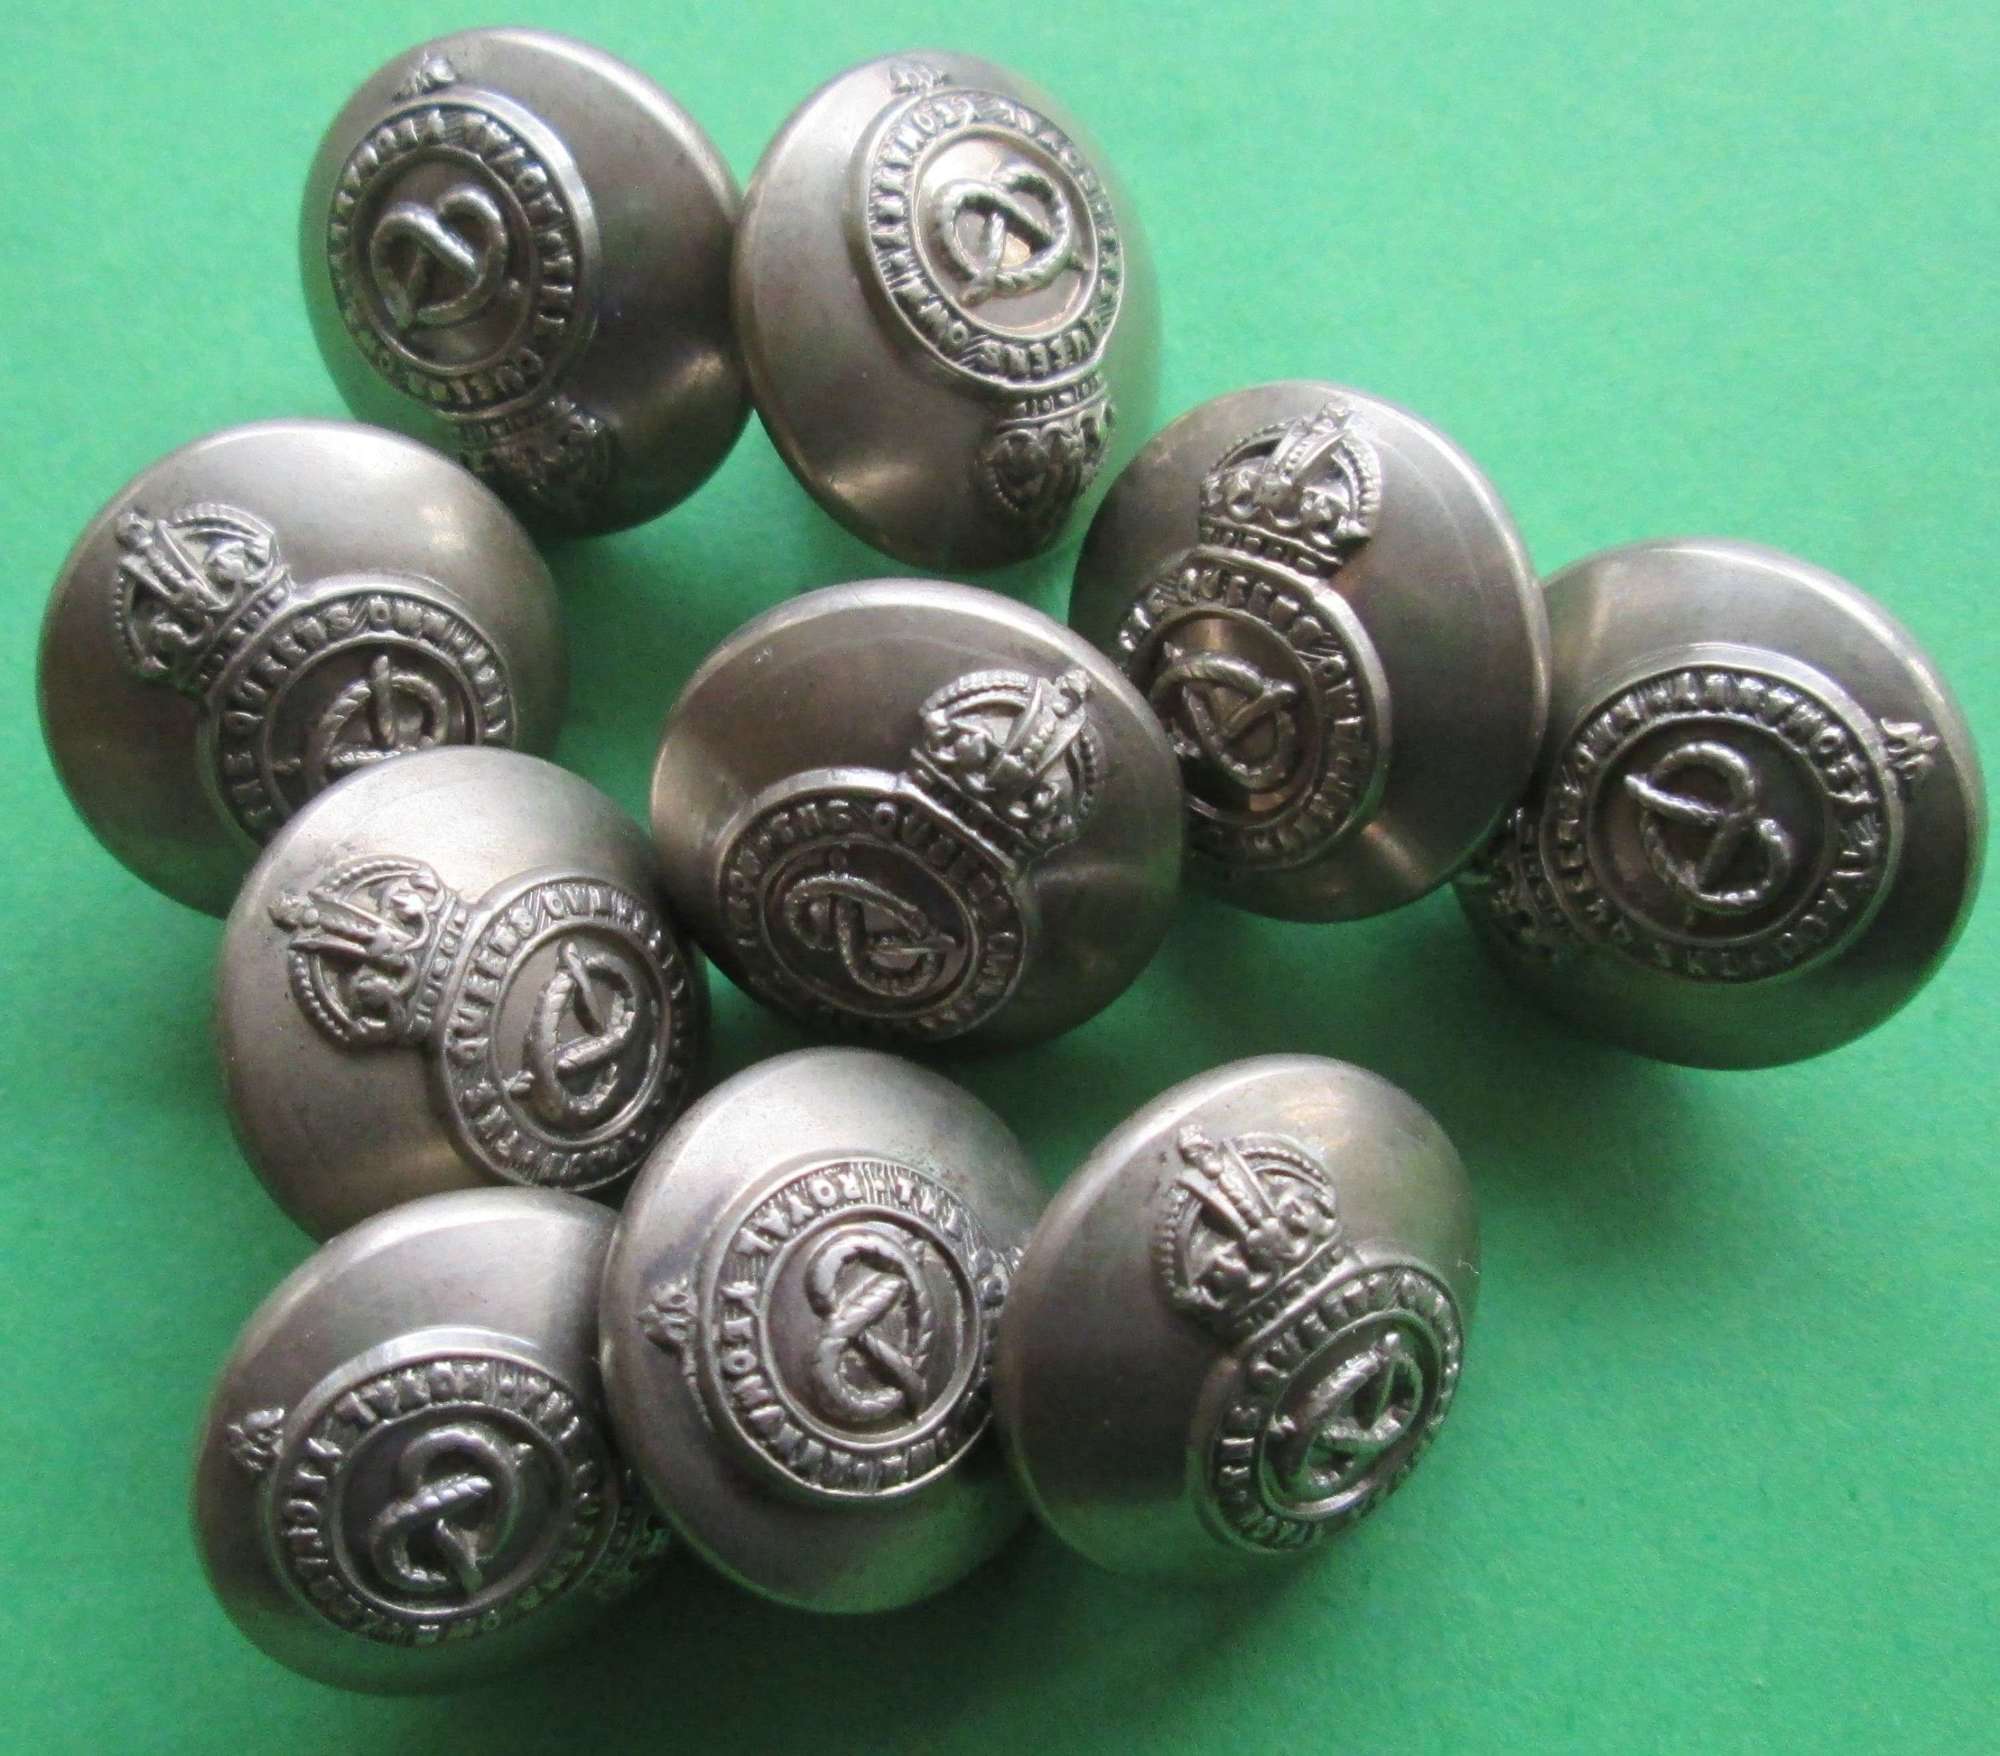 THE STAFFORDSHIRE YEOMANRY (QUEEN'S OWN ROYAL REGIMENT) BUTTONS